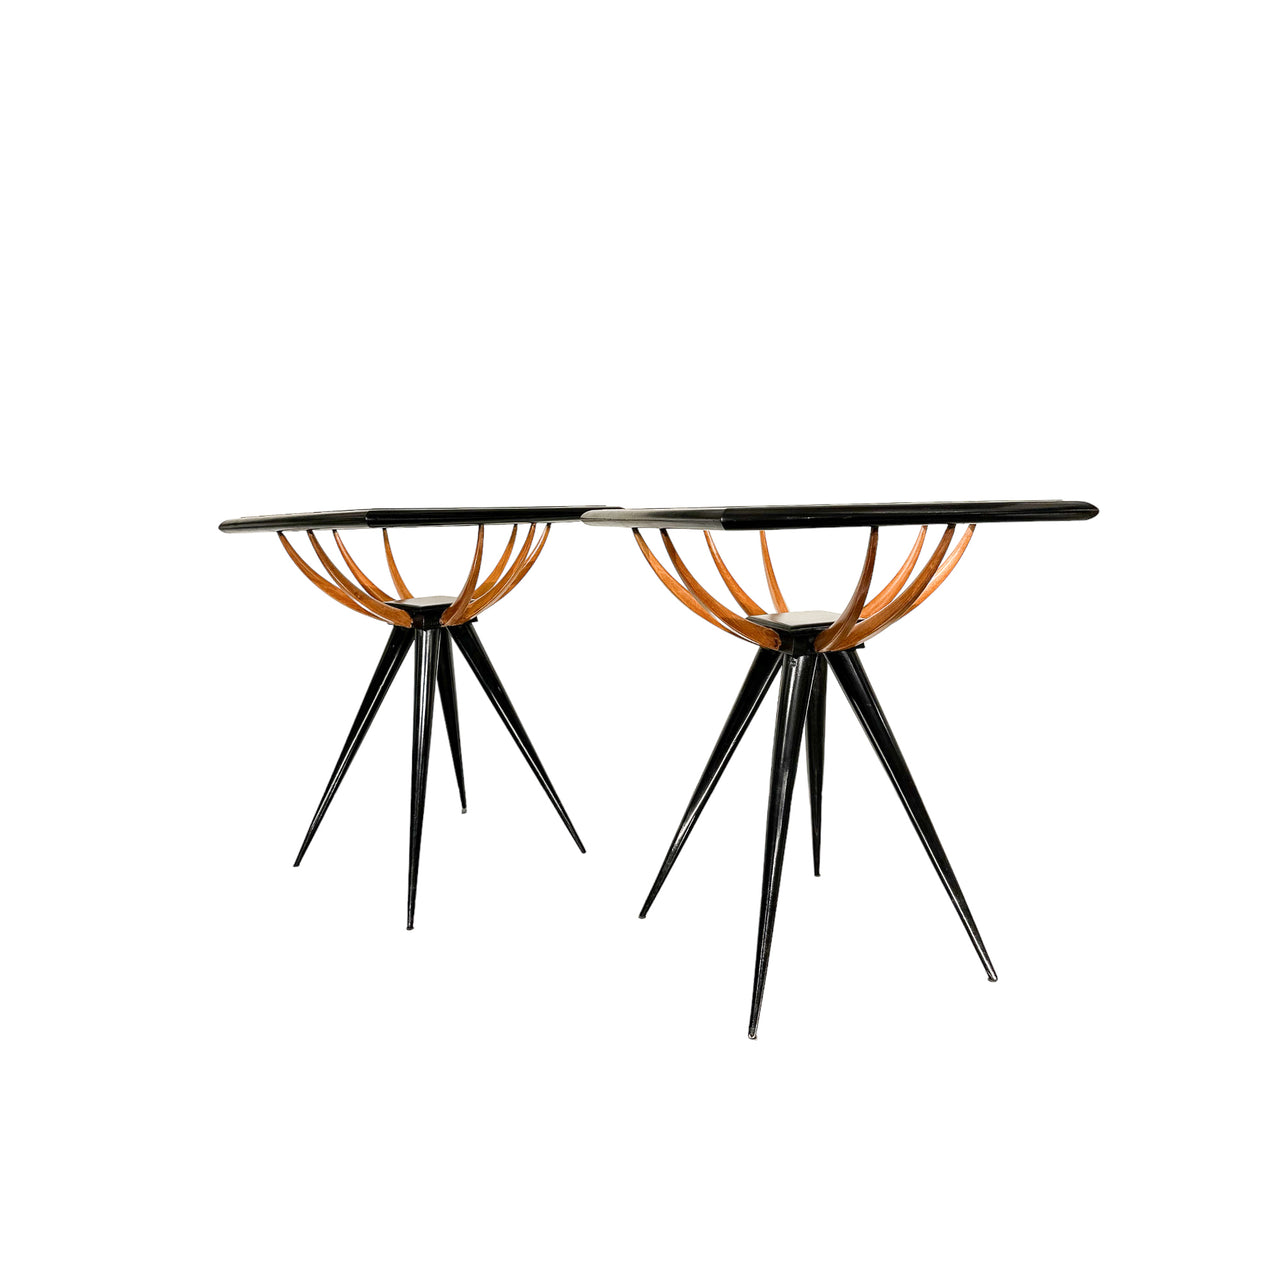 Pair of Side Tables in Two Tone Hardwood & Glass by Giuseppe Scapinelli, c. 1950 - Lot 441